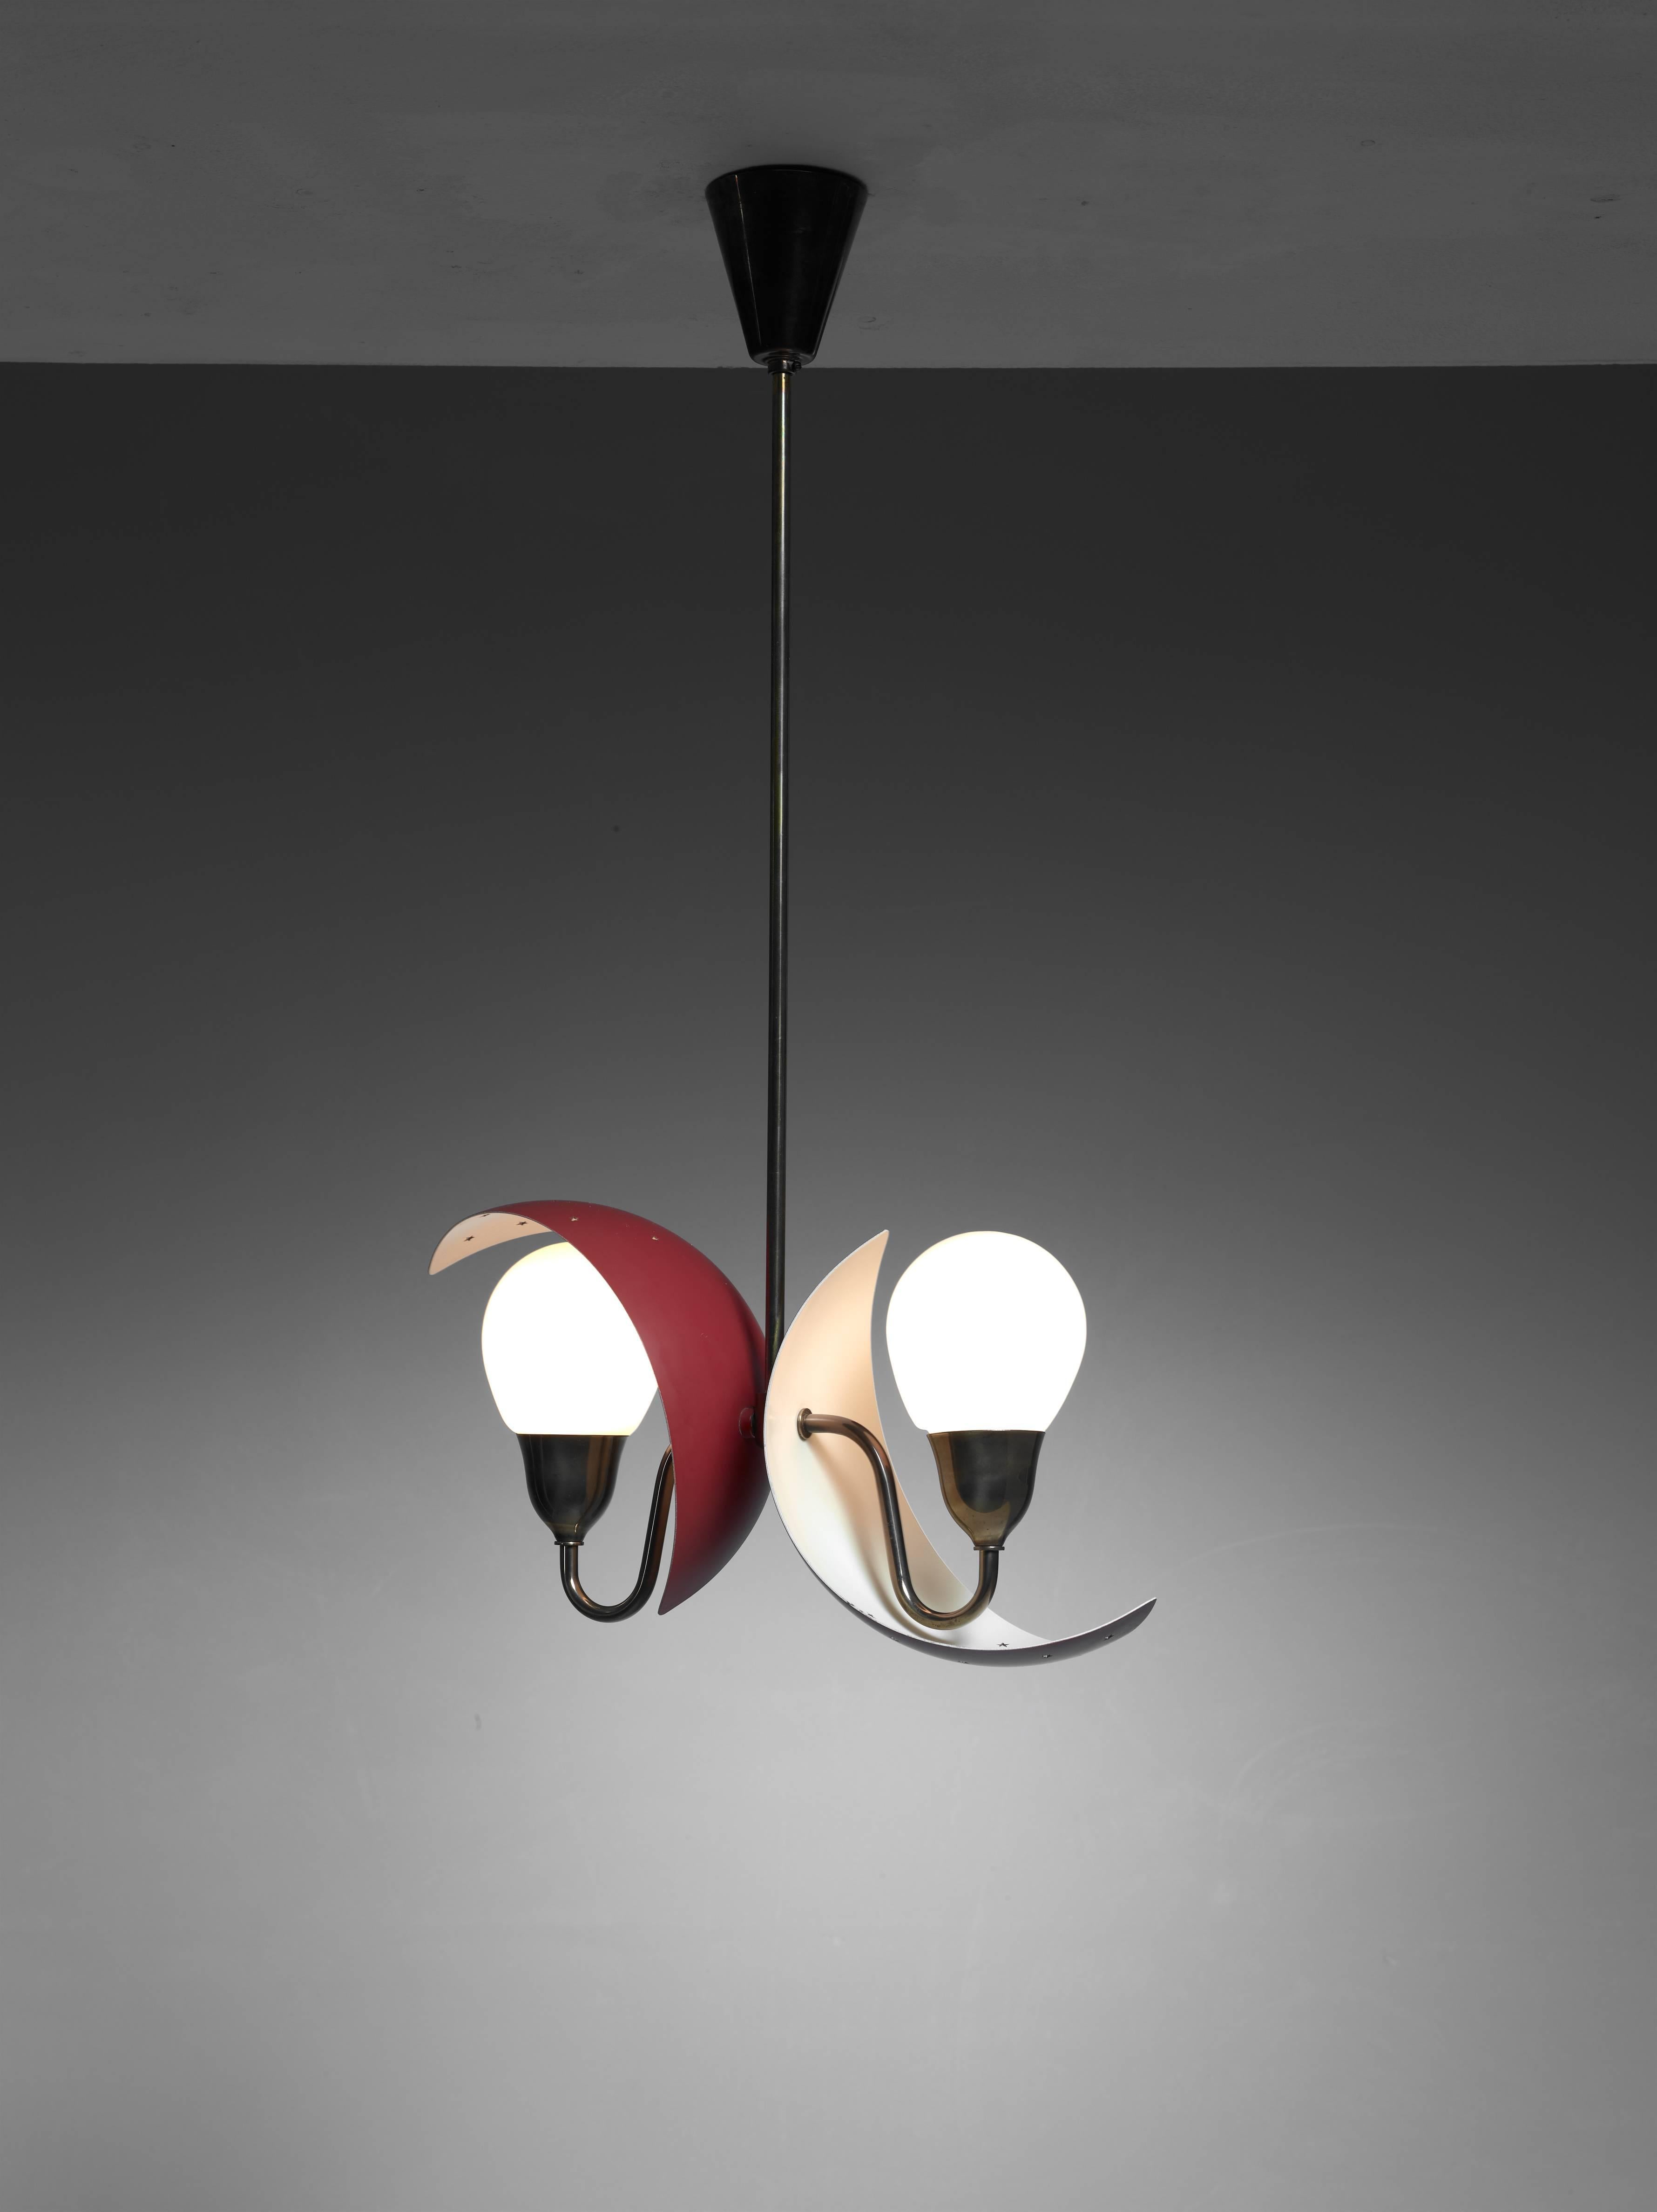 A Bent Karlby attributed pendant lamp for Fog and Mørup, Denmark. The lamp has two crescent shaped dark red metal shades with an opaline glass diffuser each. The shades have star shaped perforations and are adjustable to direct the light according